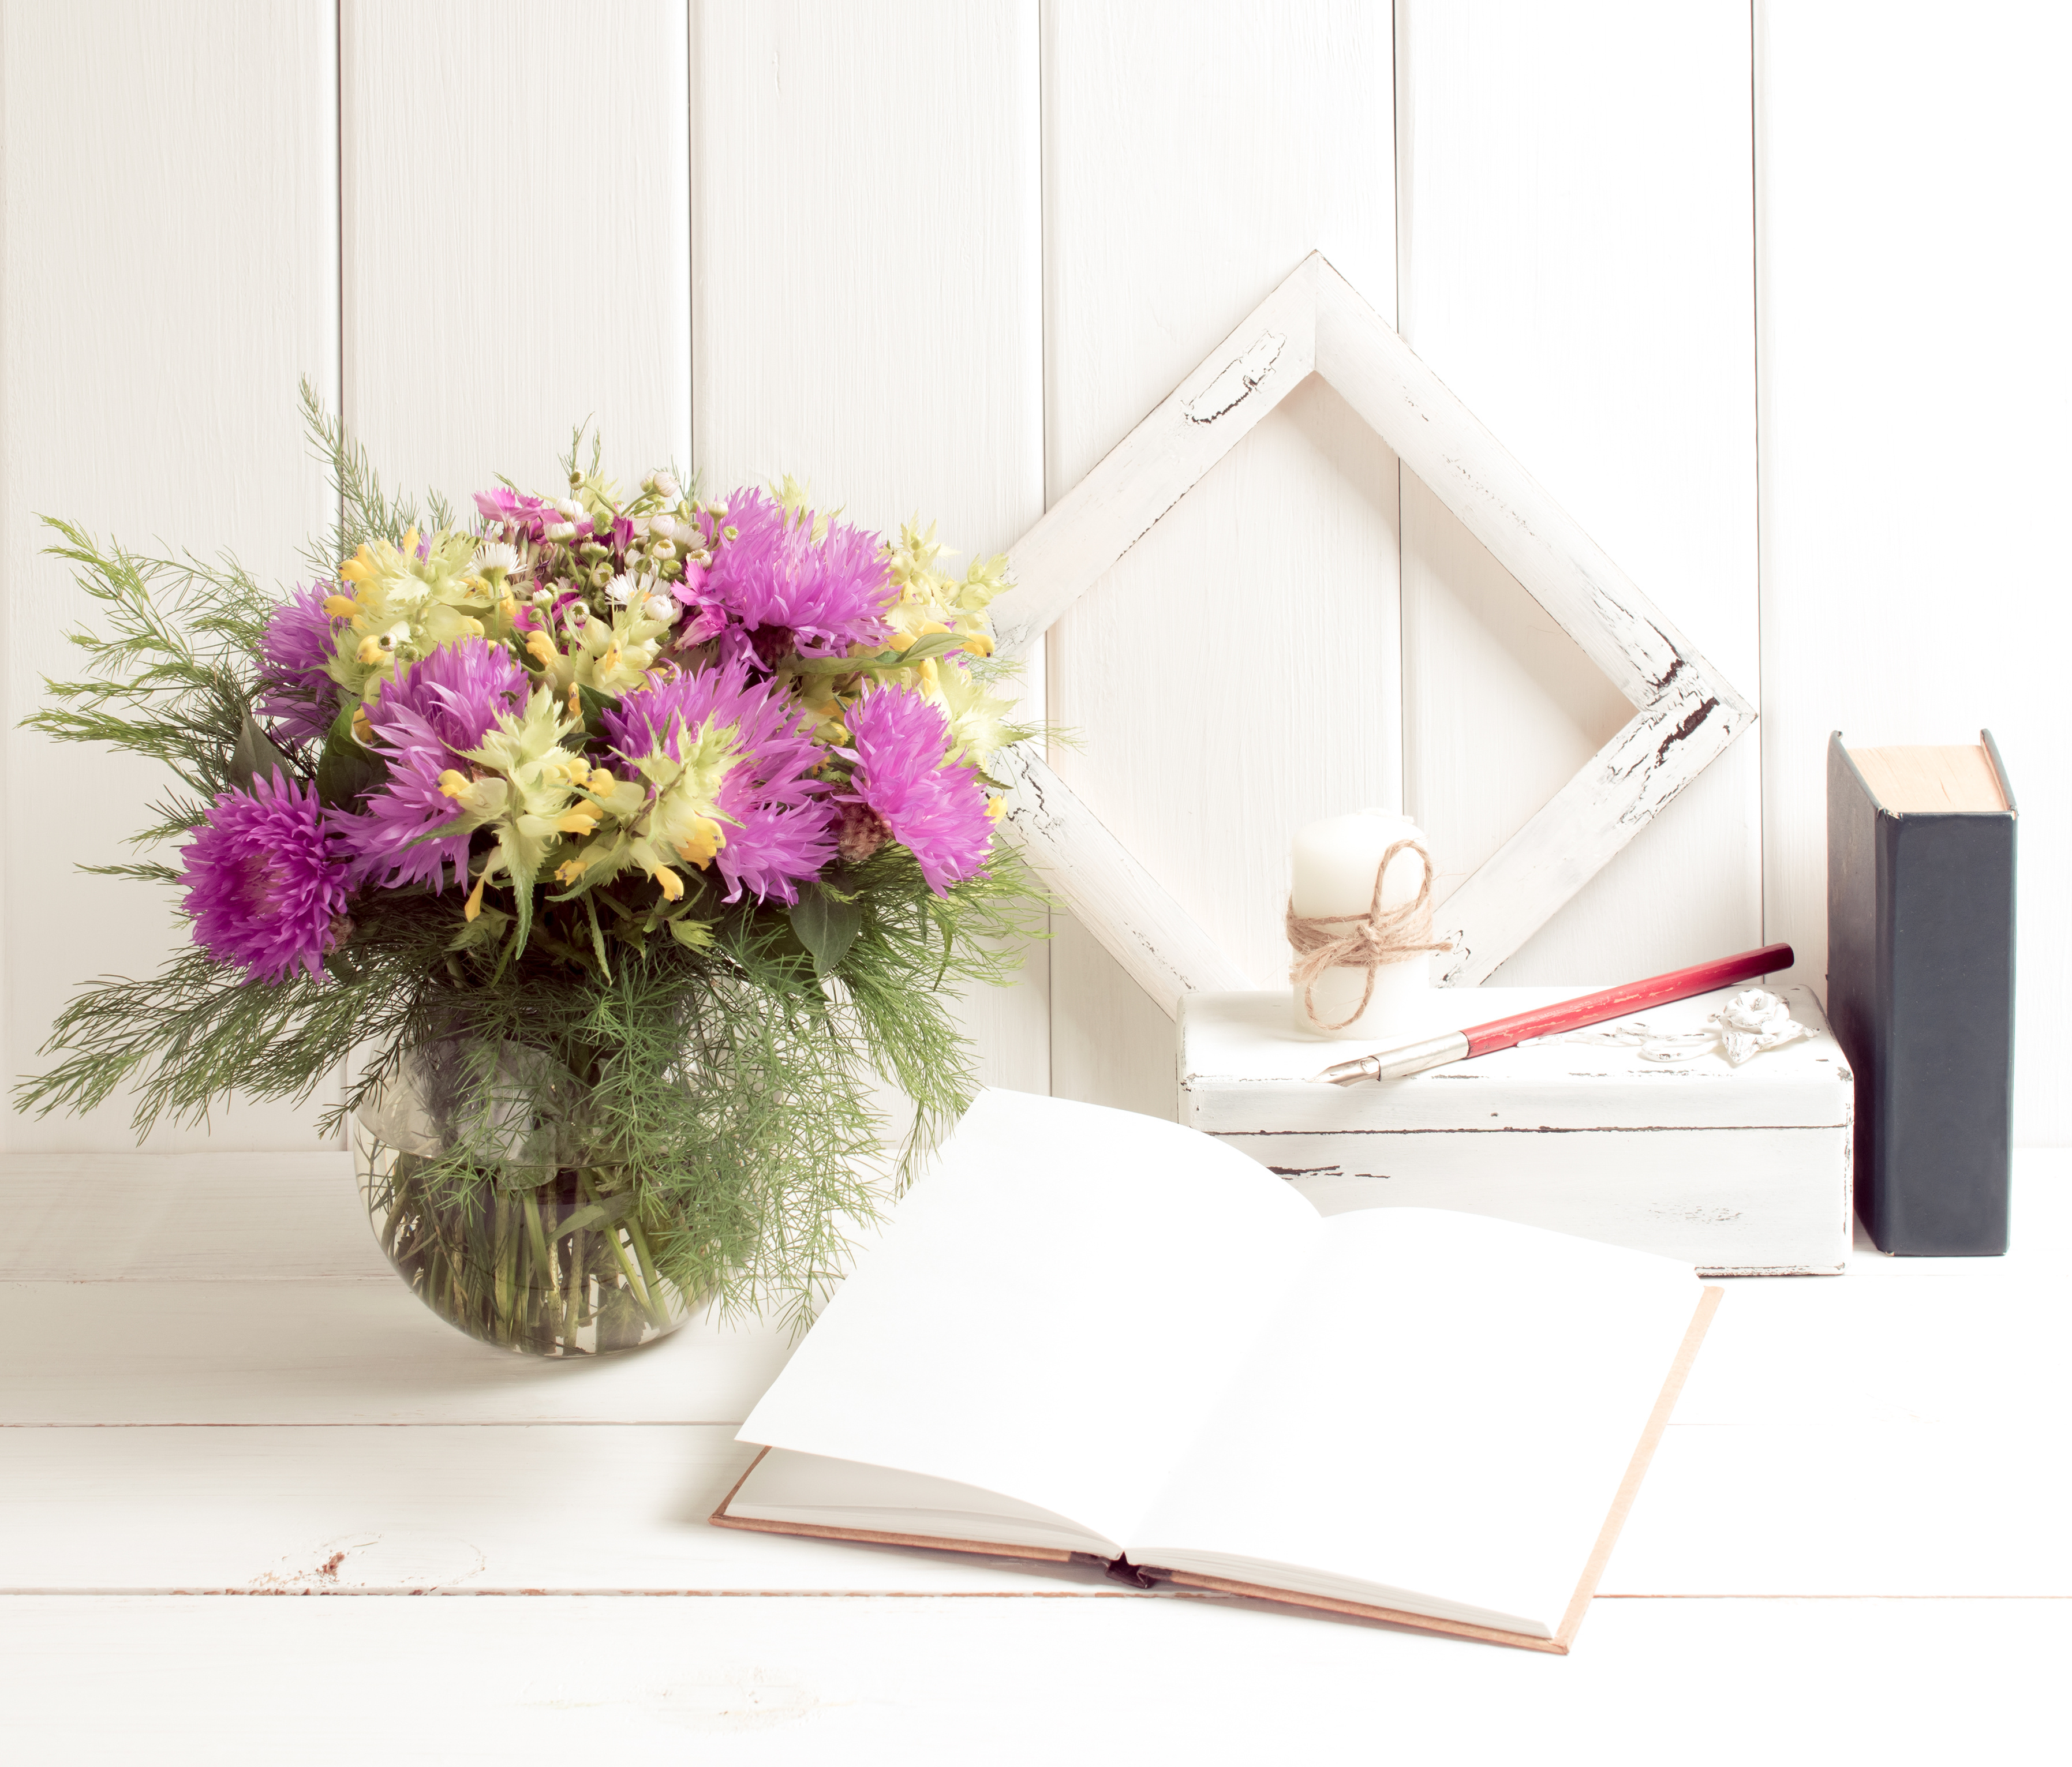 pink flowers in vase with open diary, book and frame, candle